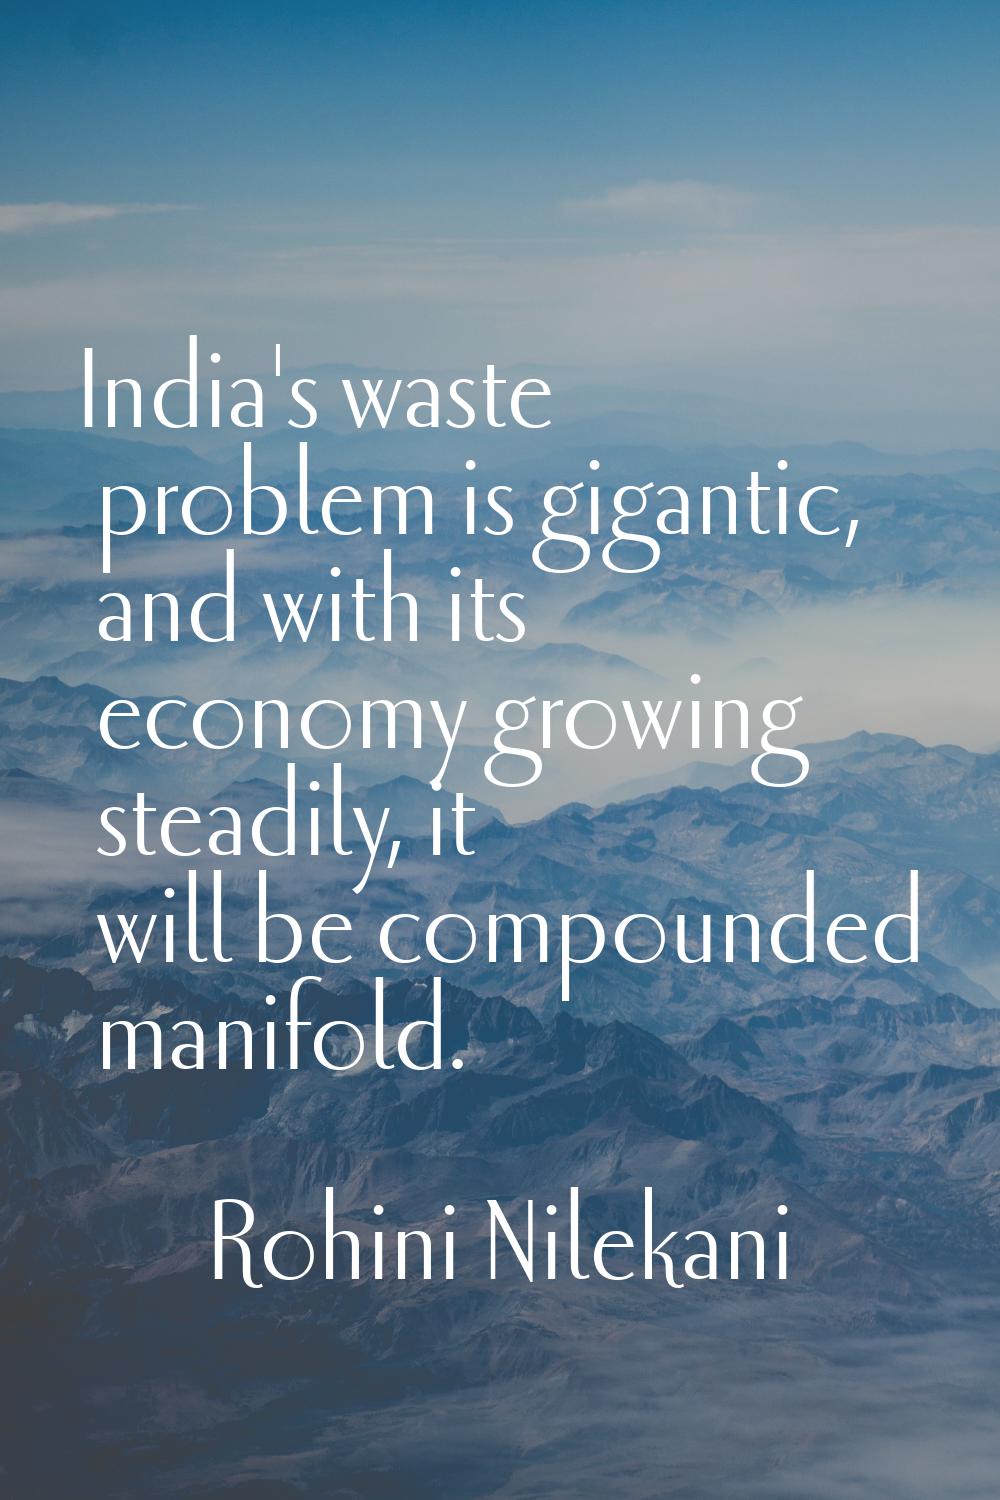 India's waste problem is gigantic, and with its economy growing steadily, it will be compounded man